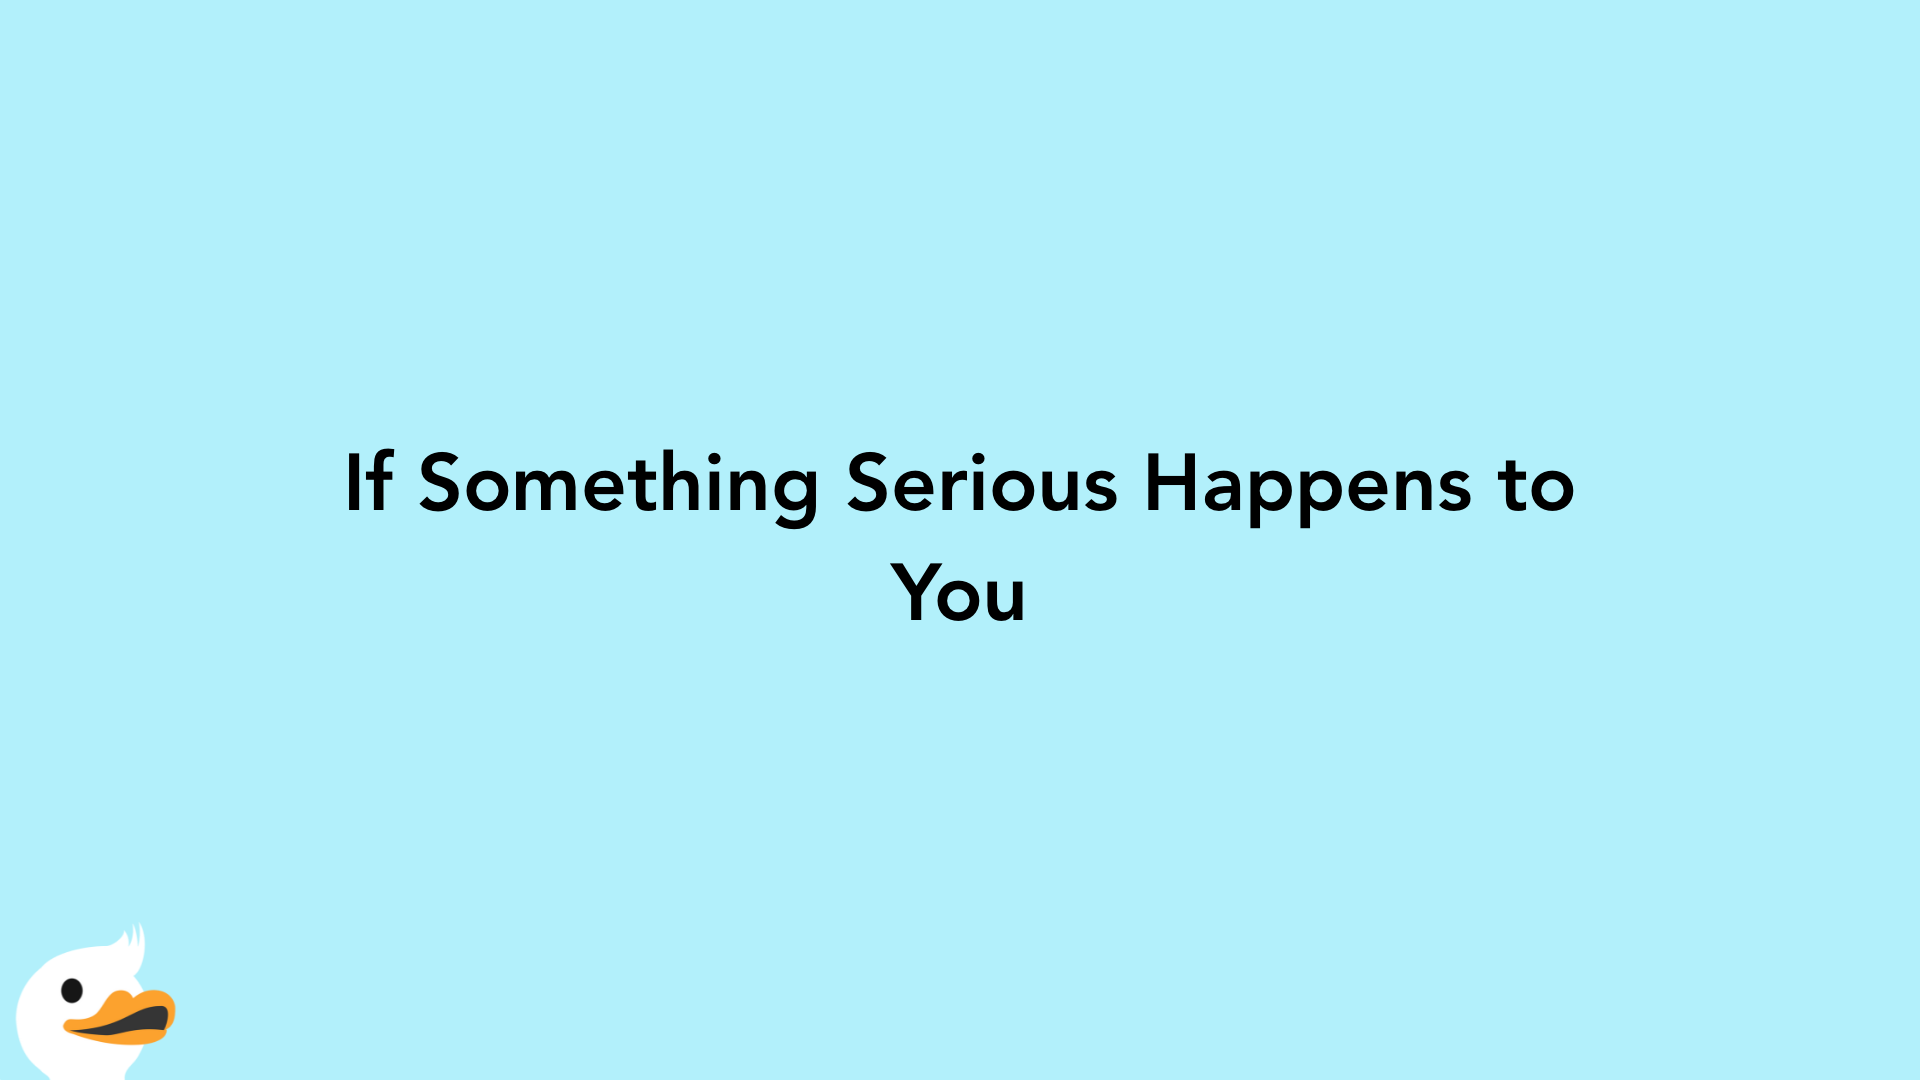 If Something Serious Happens to You